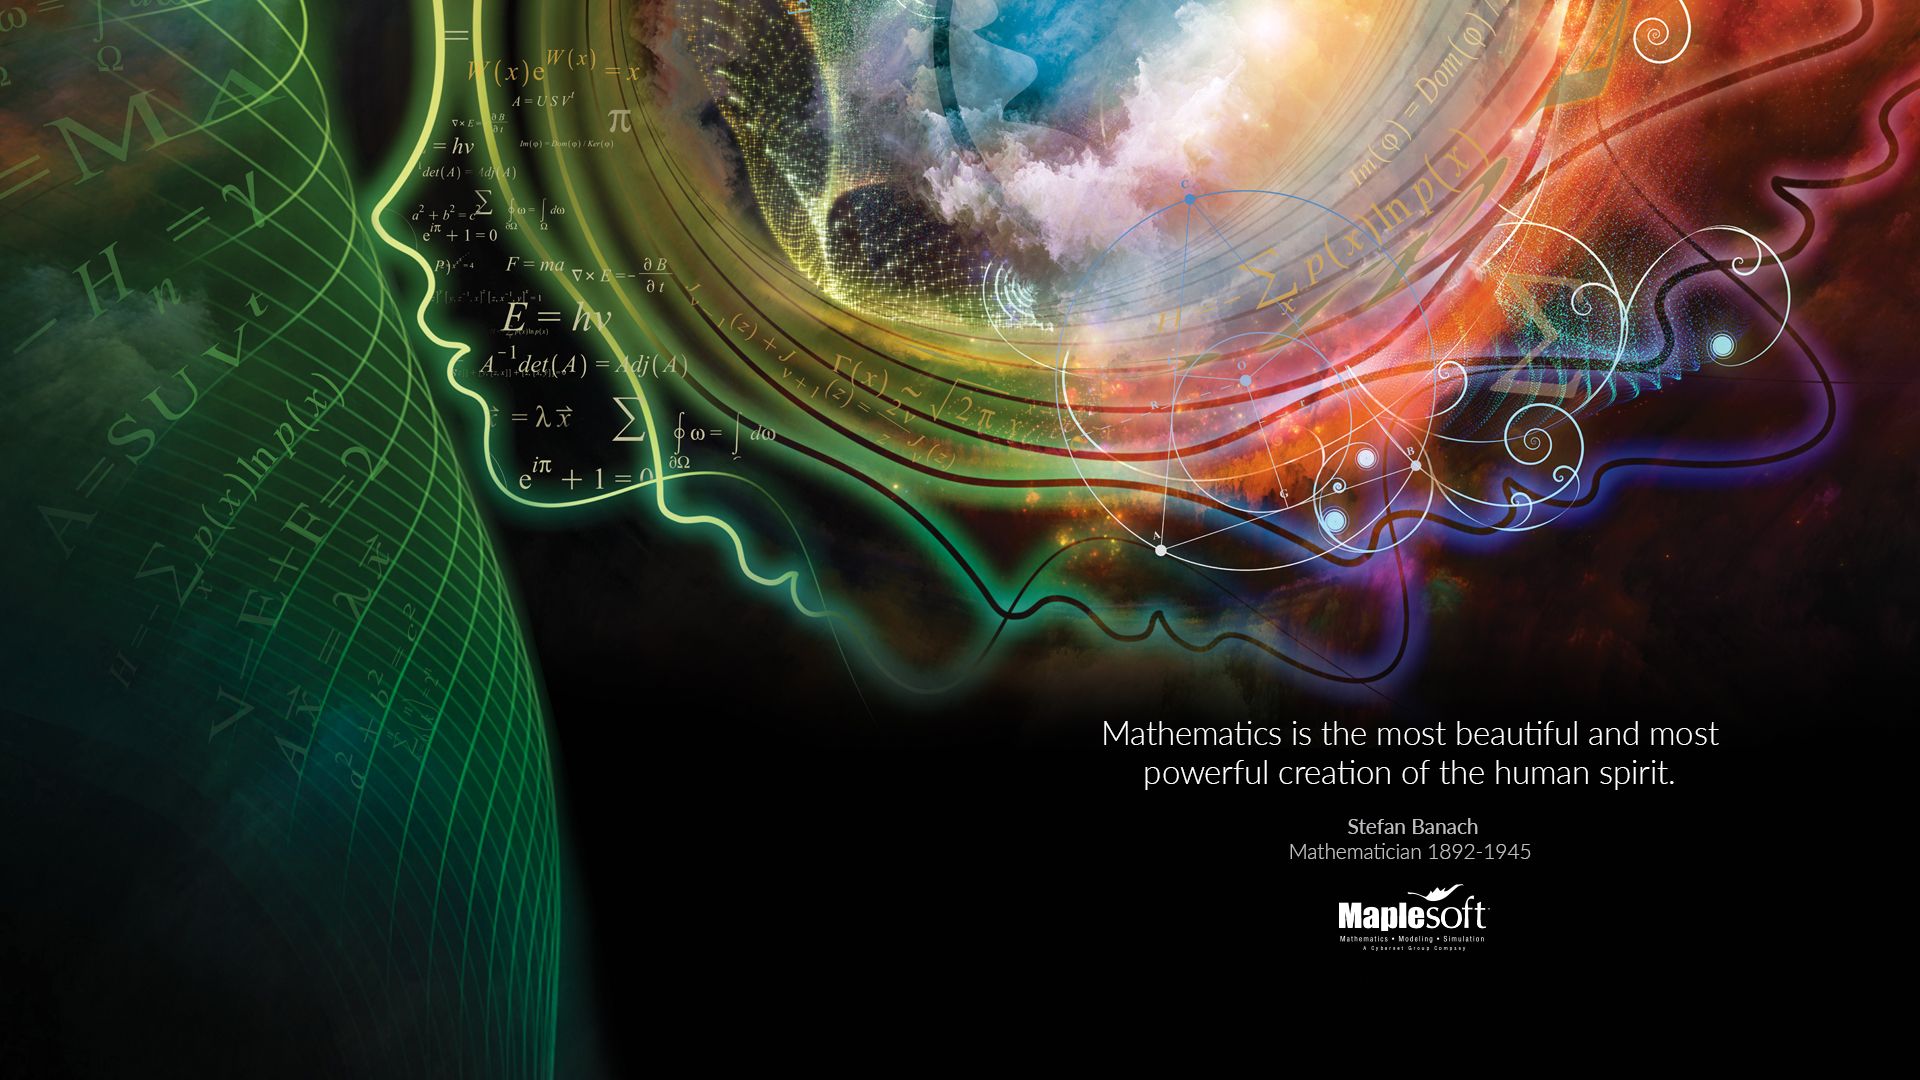 Free Math & Engineering Posters and Desktop Wallpaper